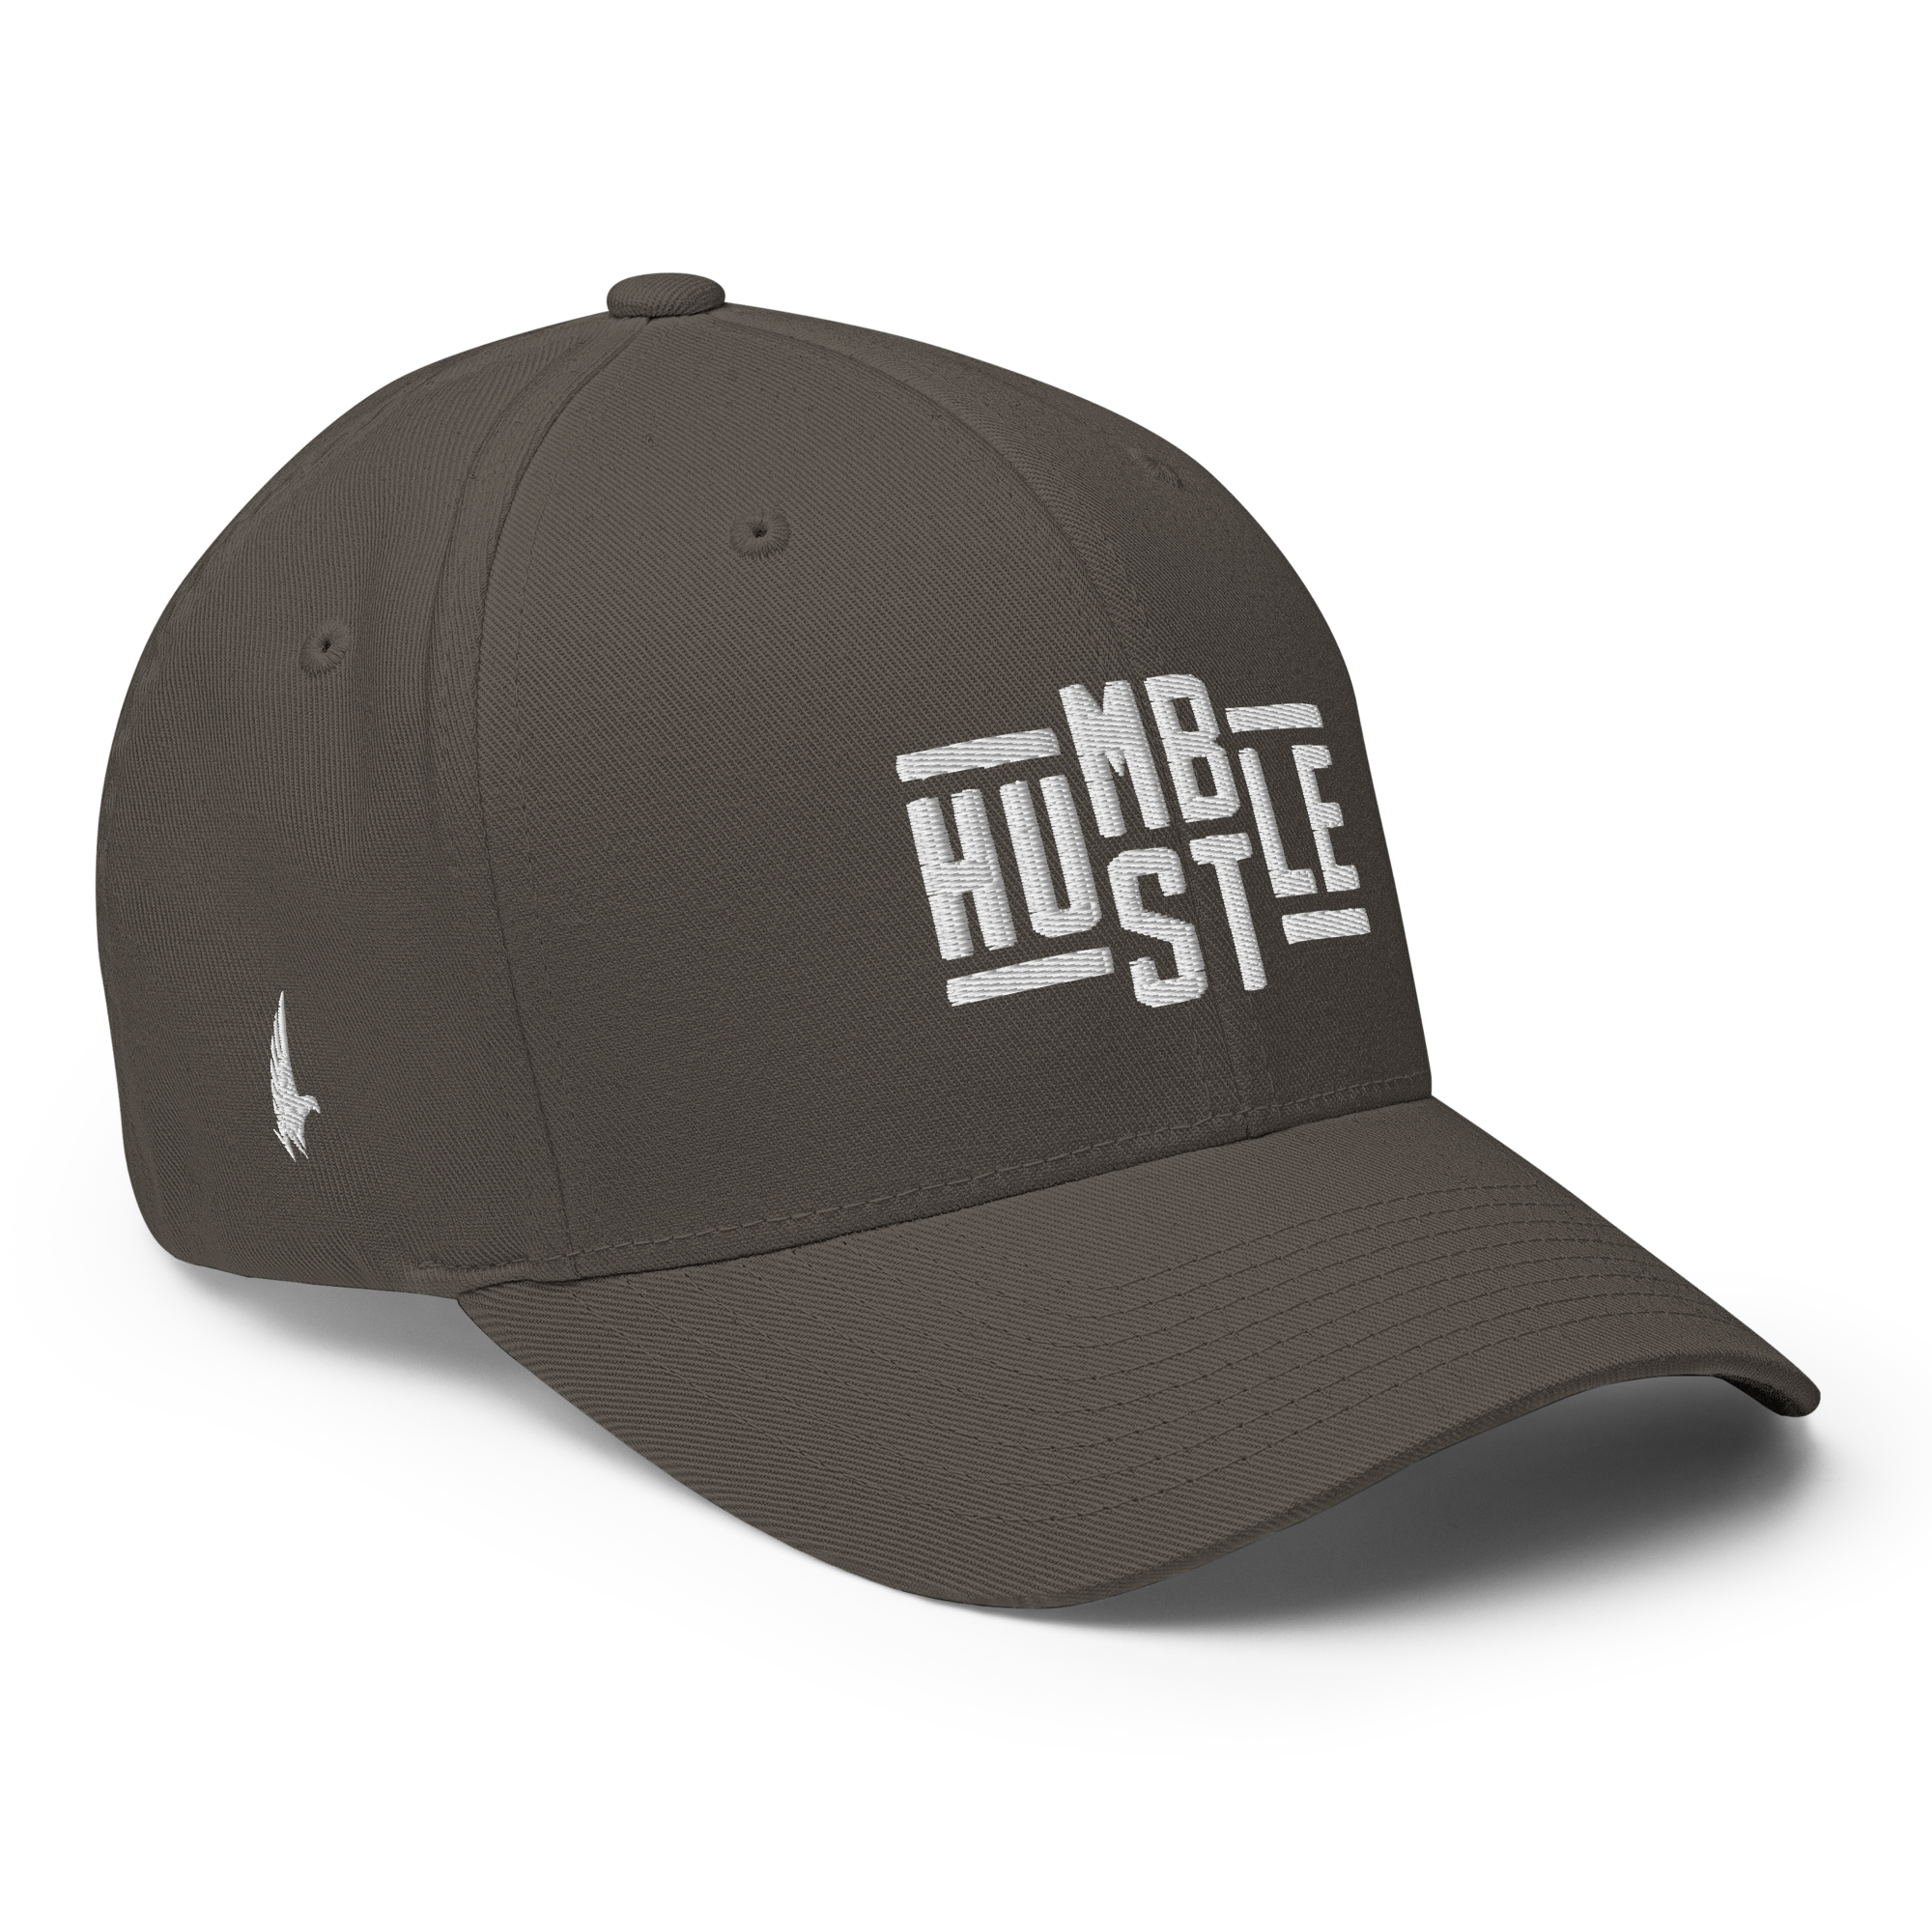 Loyalty Vibes Hustle Fitted Hat - Charcoal Gray / White Fitted - Loyalty Vibes